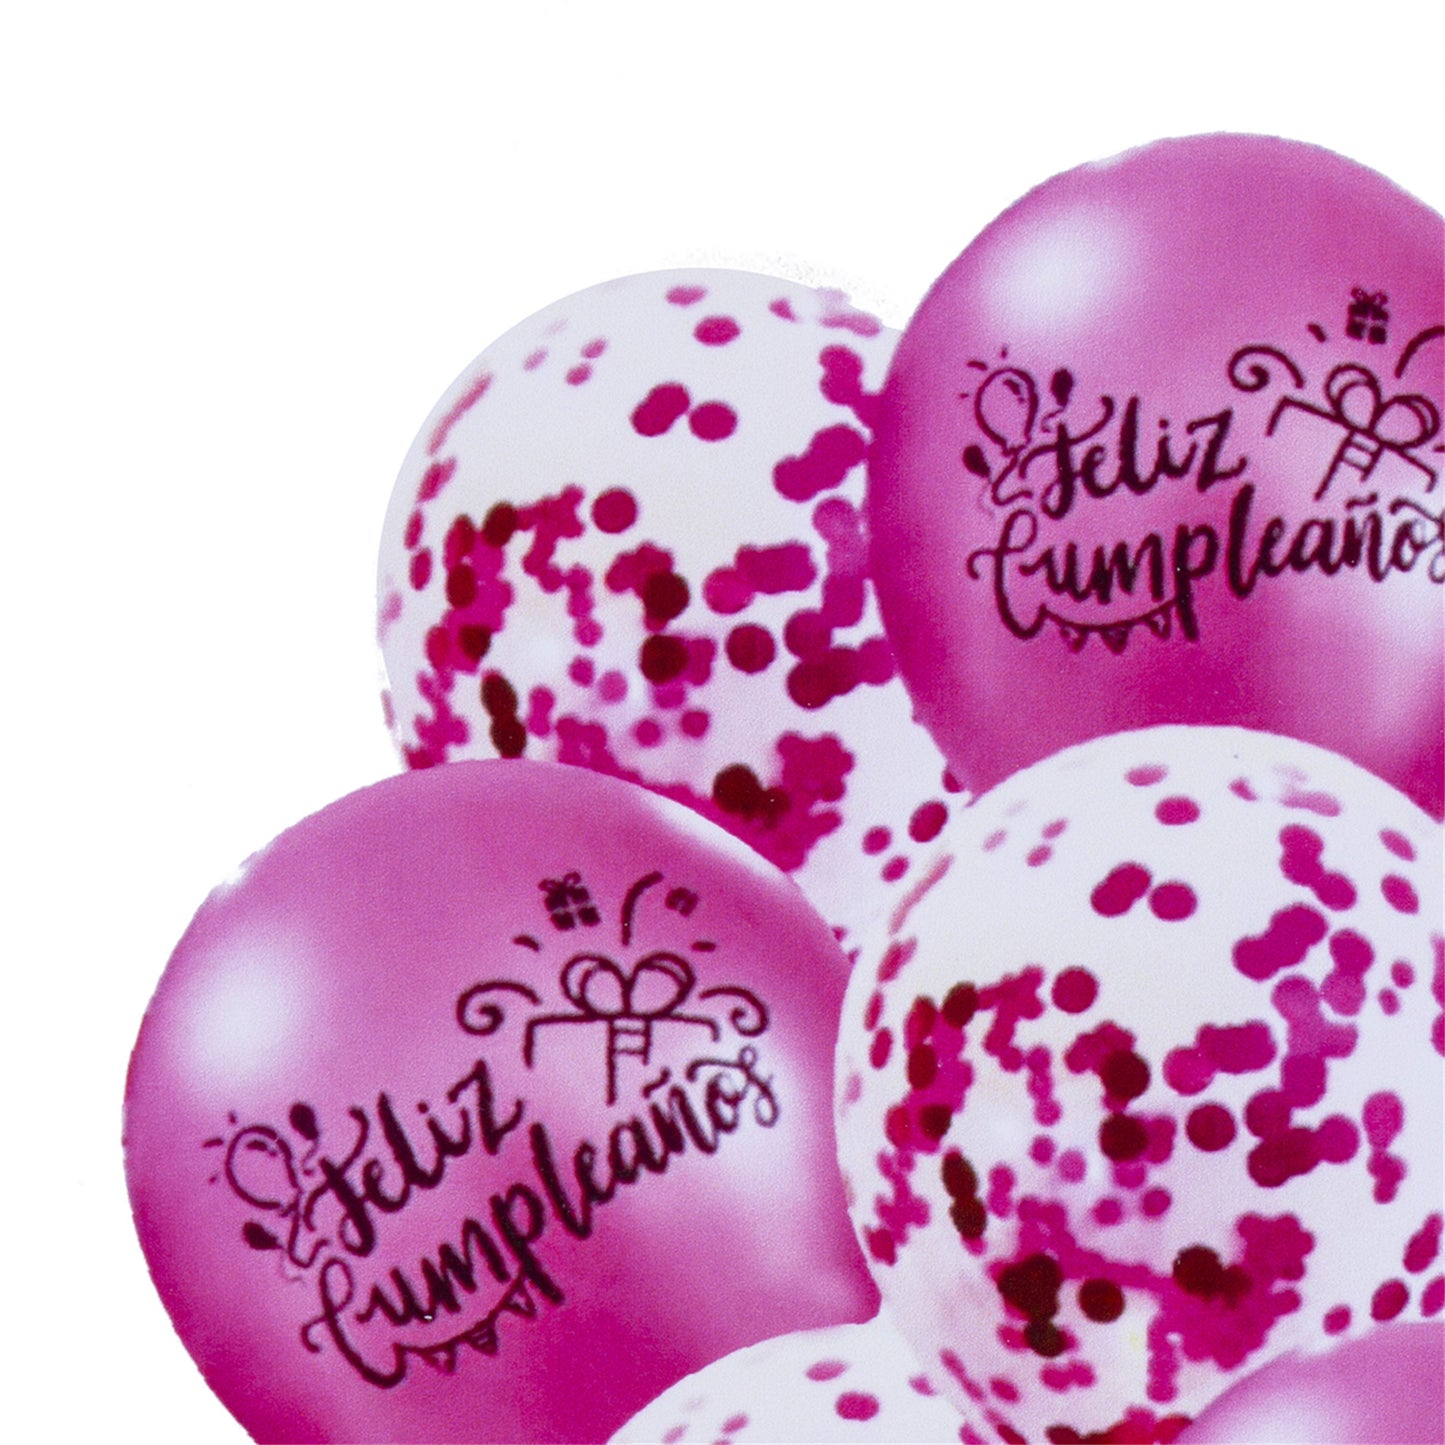 Party balloon  wedding,themed party,celebrations